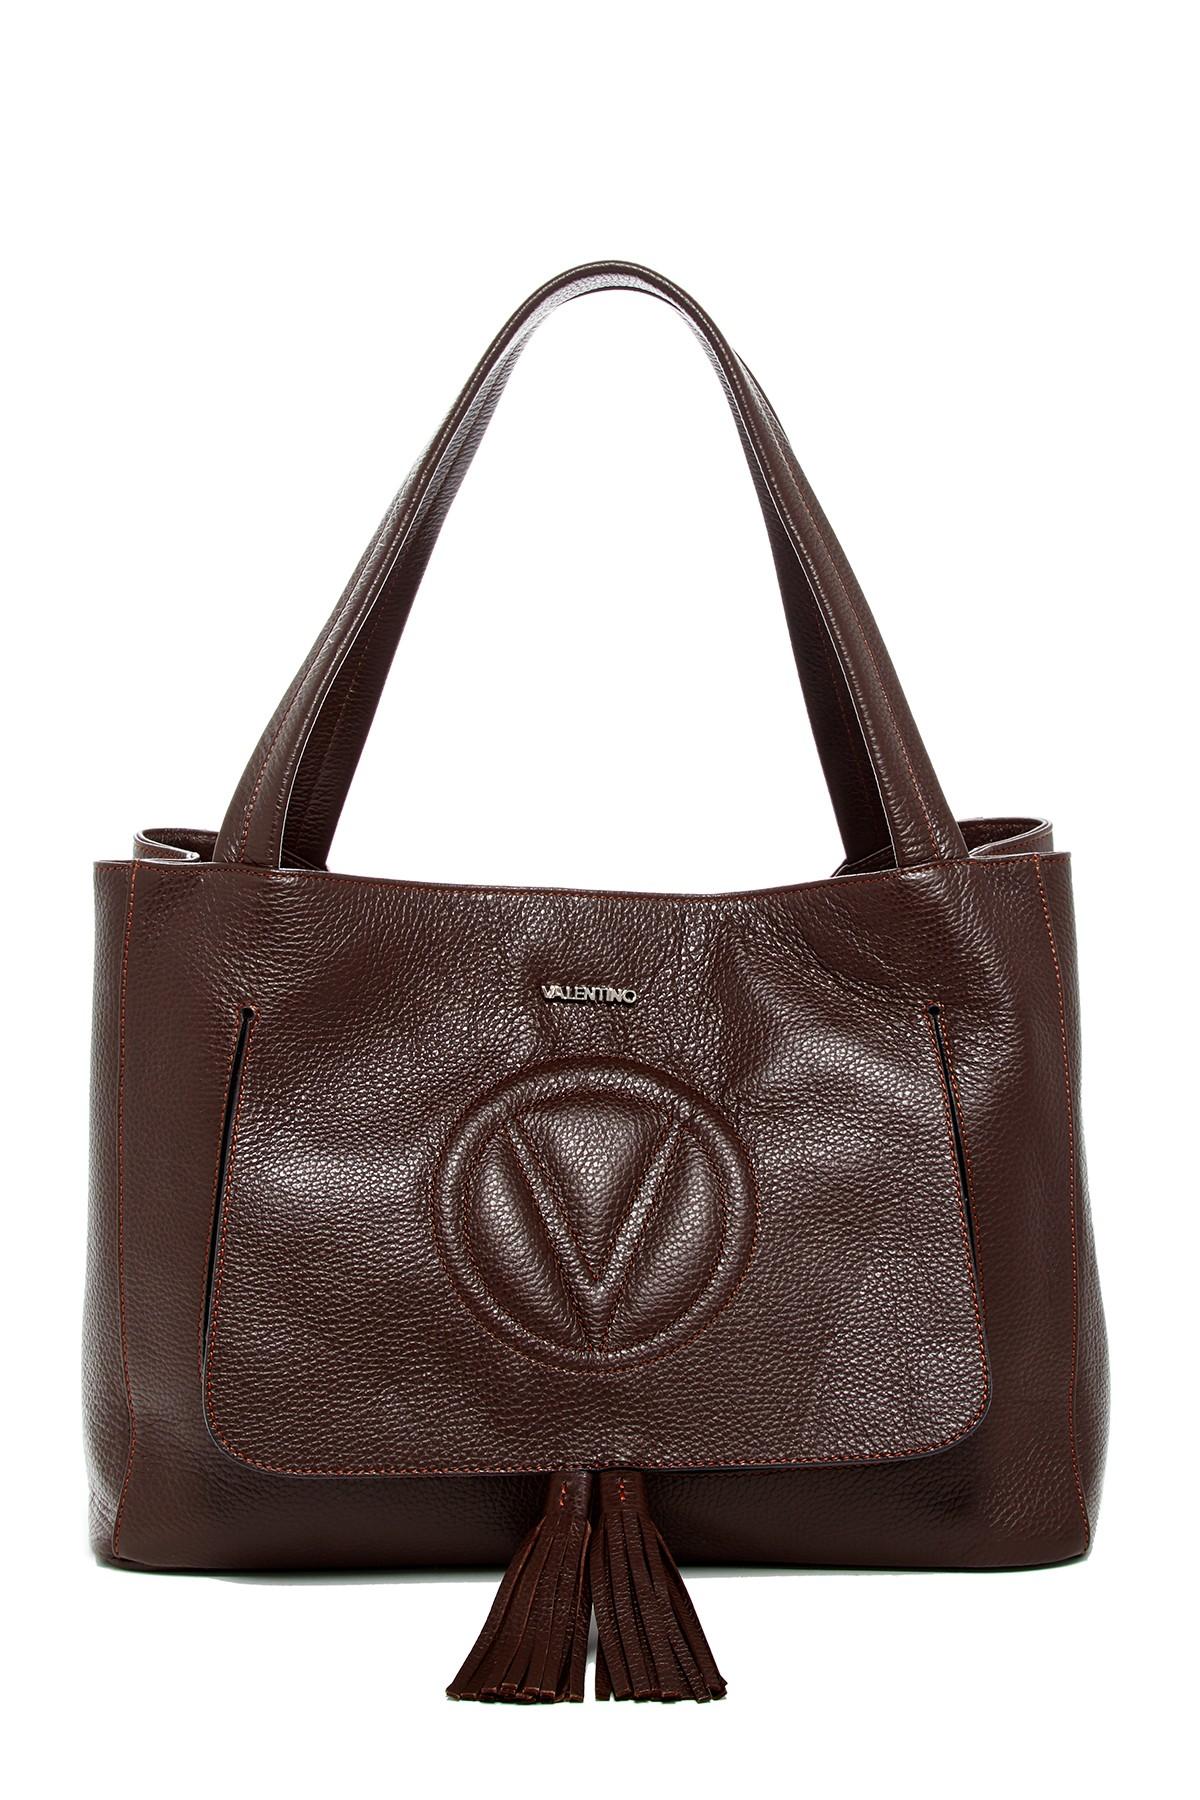 Lyst - Valentino By Mario Valentino Ollie Leather Shoulder Bag in Brown